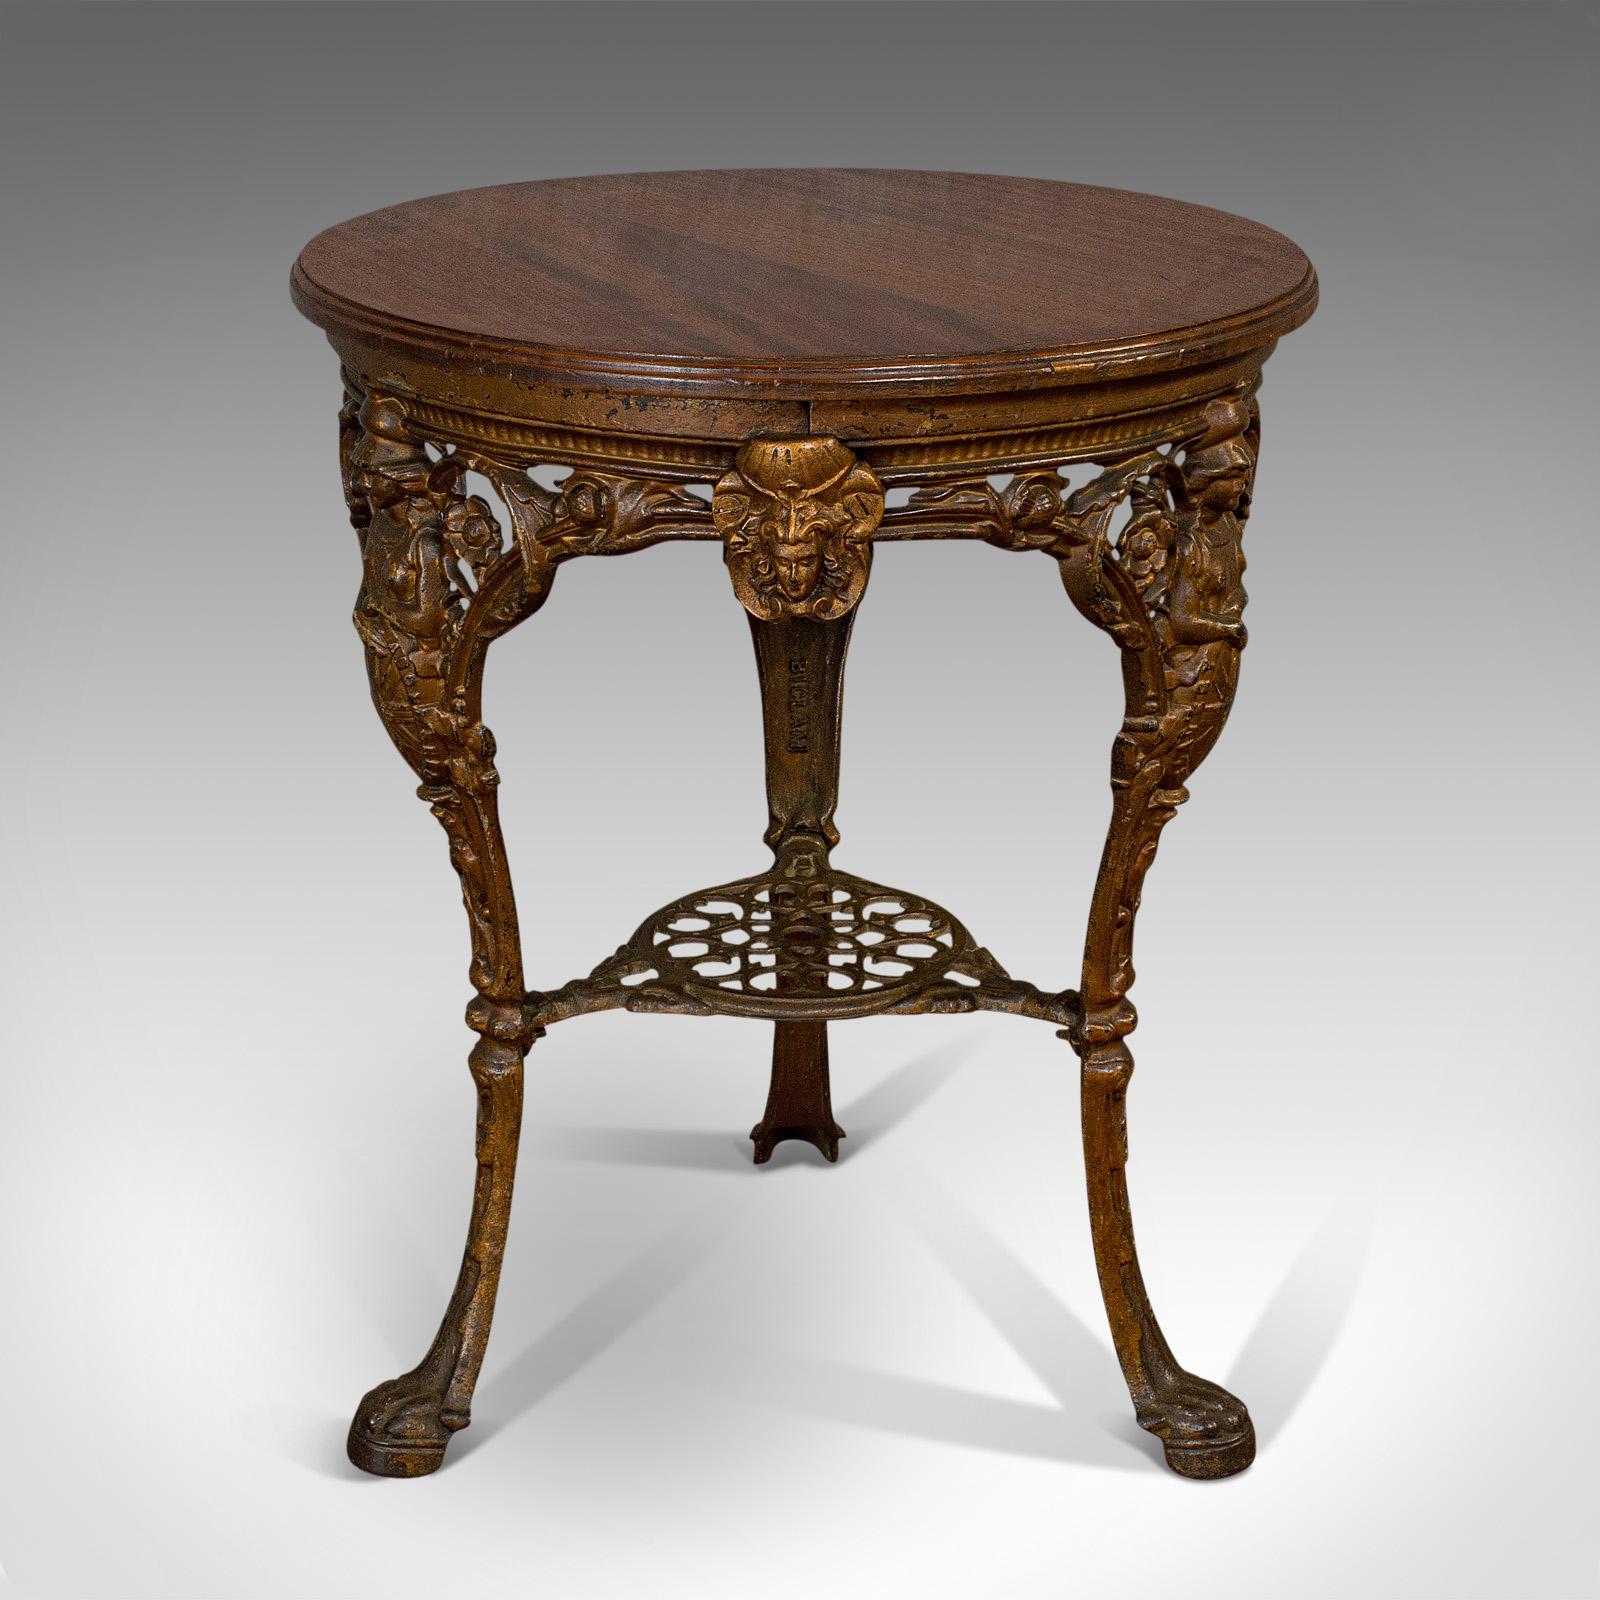 This is an antique Britannia table. An English, mahogany over cast iron outdoor garden table from the Biclam Foundry, dating to the late 19th century, circa 1880.

Appealing table with dark hues throughout
Displays a desirable aged